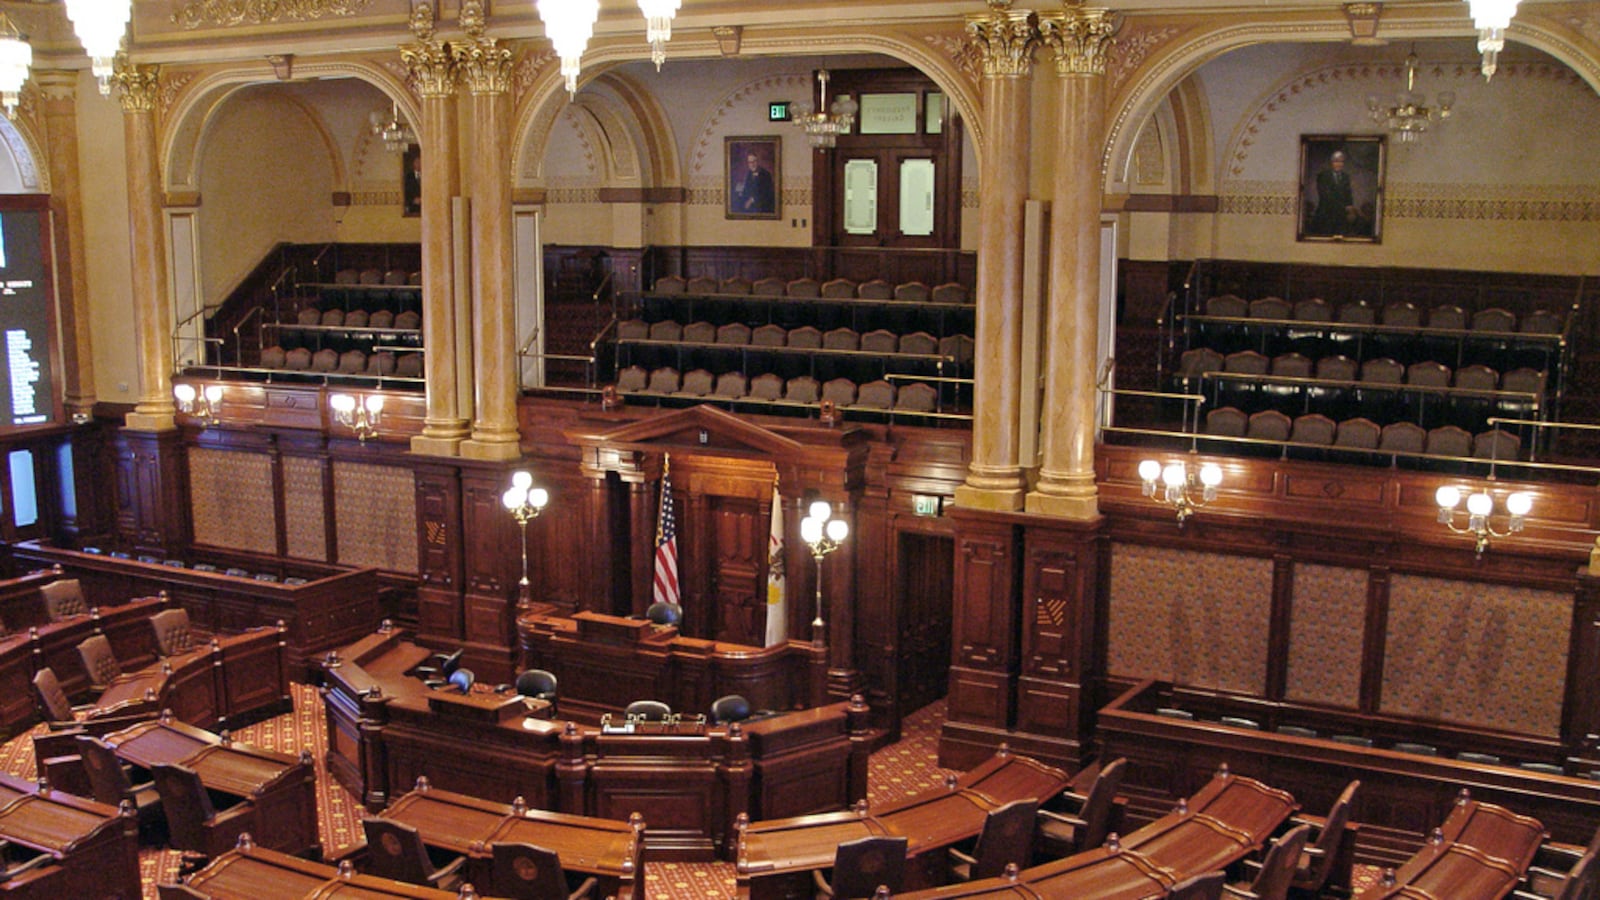 A view of the Republican side of the Illinois Senate Chamber.